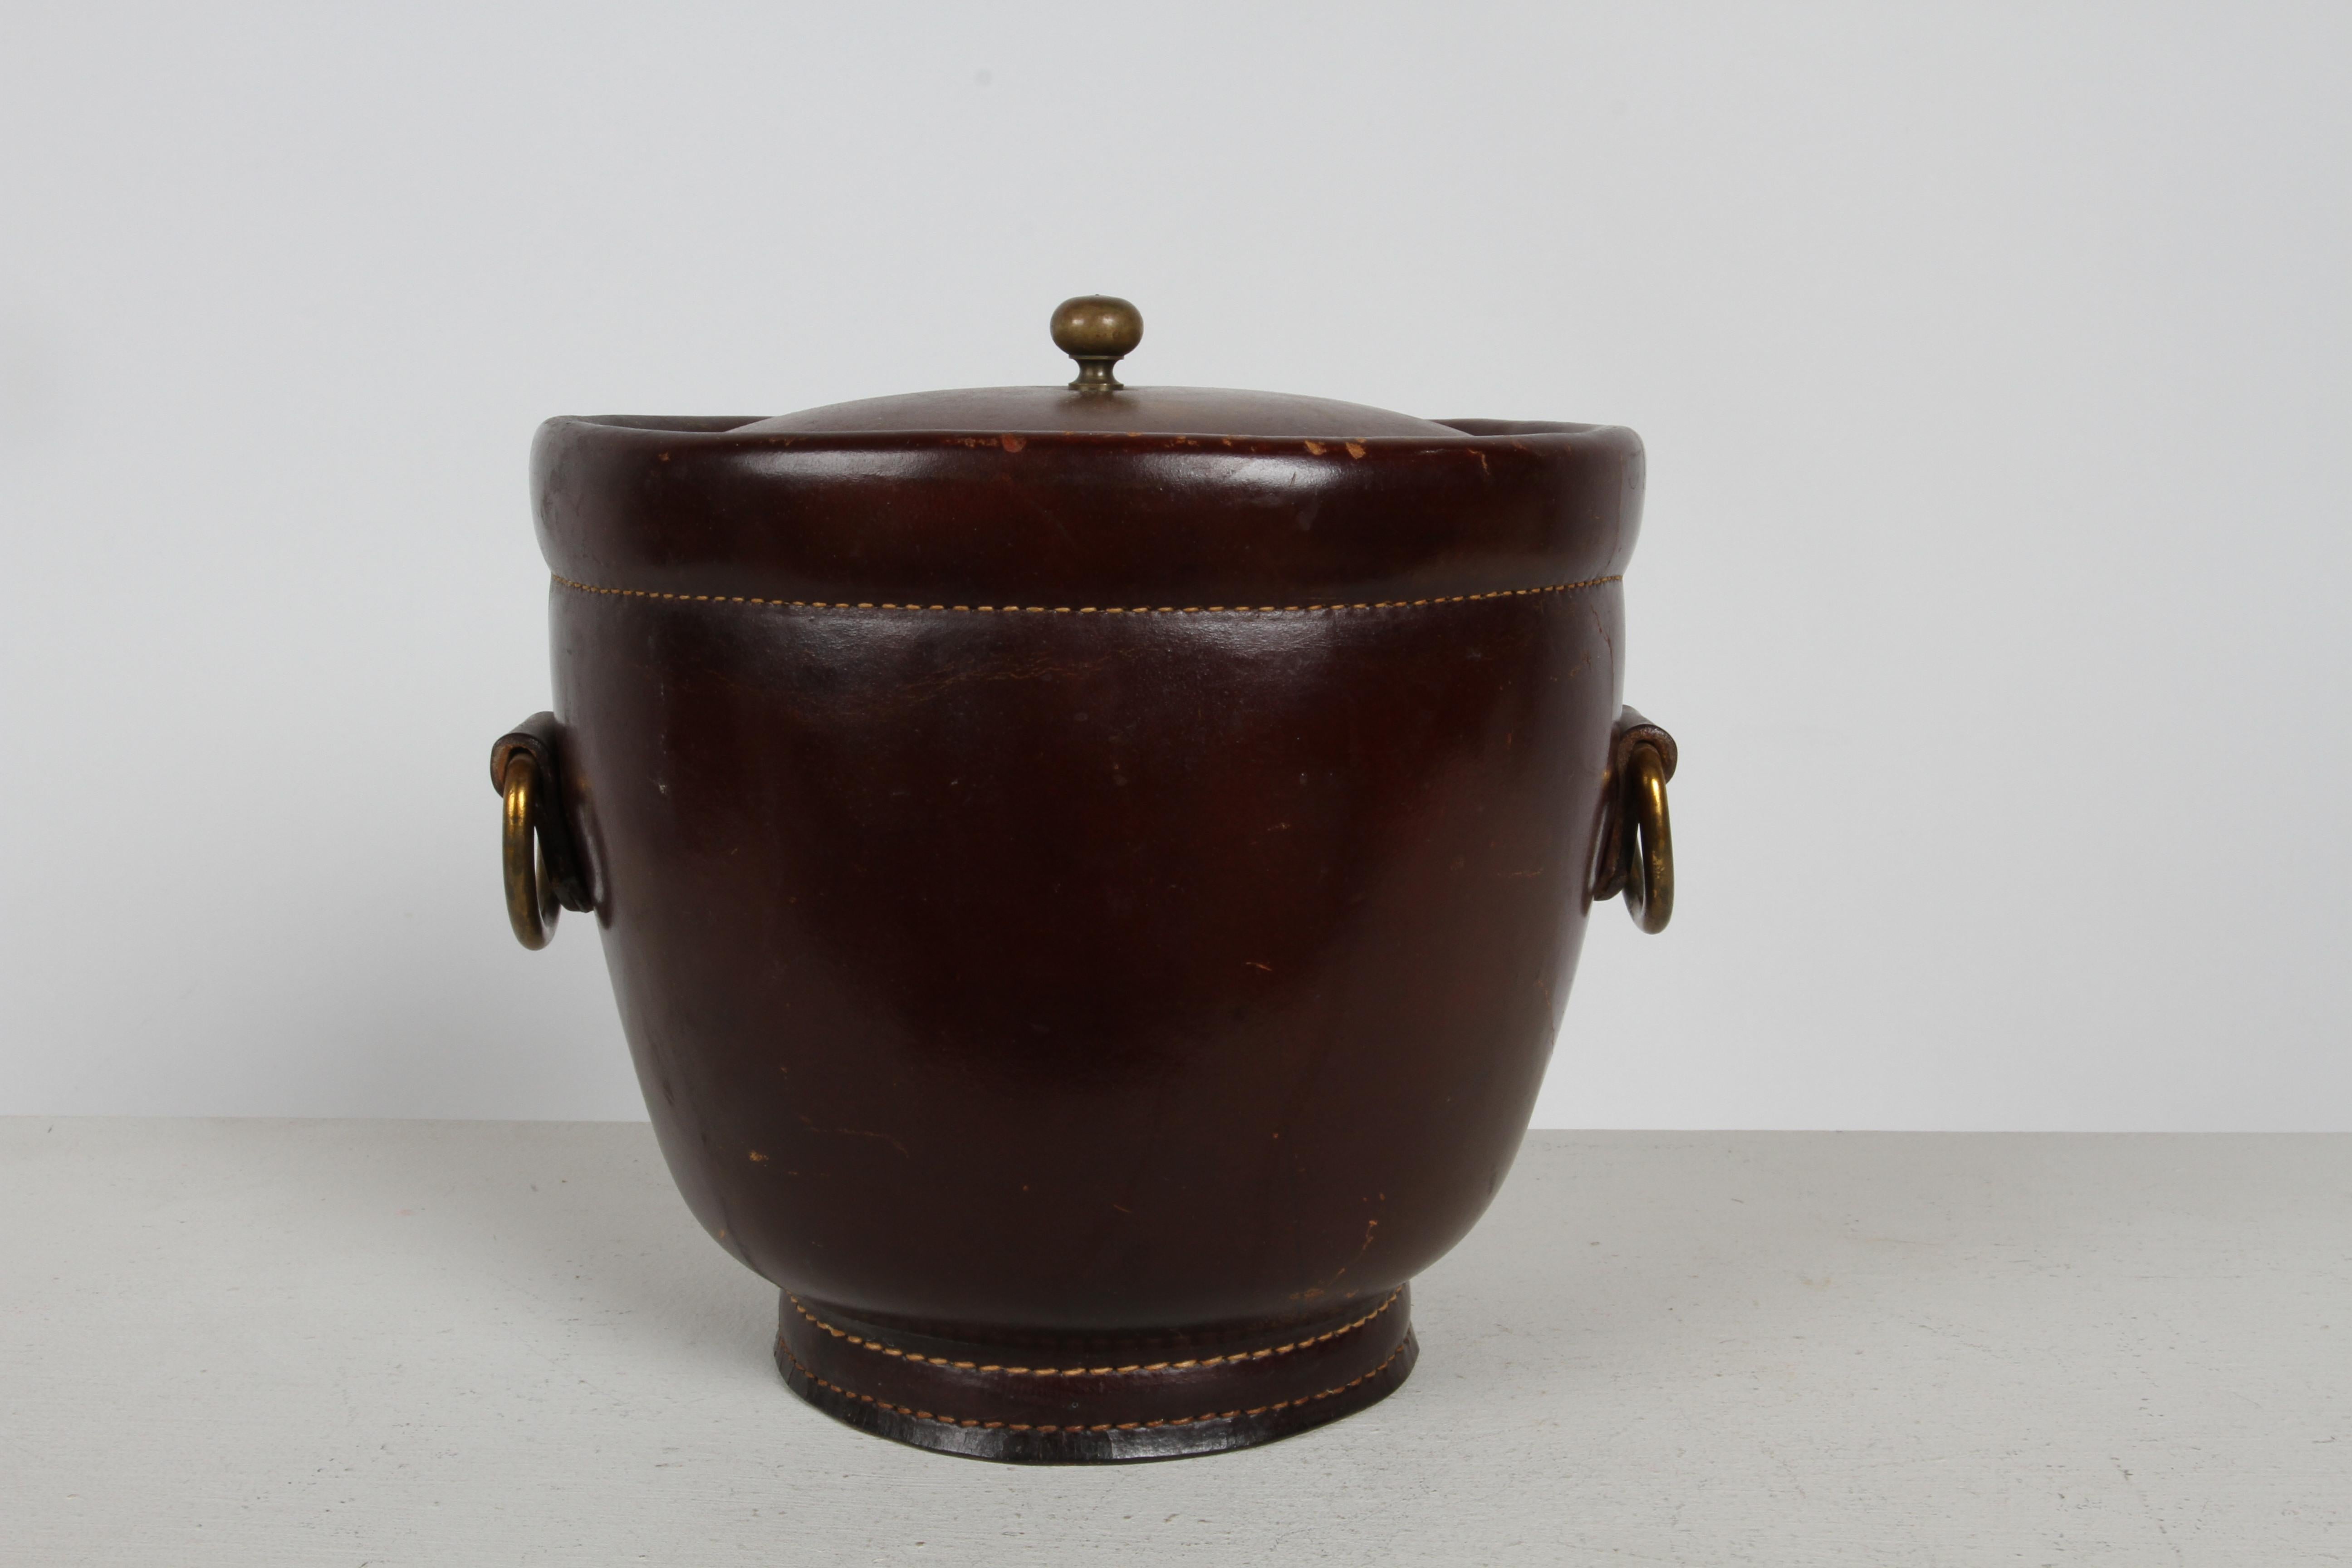 Handsome 1960s Jacques Adnet style vintage leather & brass ice bucket with heavy stitching , brass loop side handles , brass lid knob with gold anodized aluminum liner insulated by fiberglass. Scuffs to leather, wear and dings to liner. Unmarked